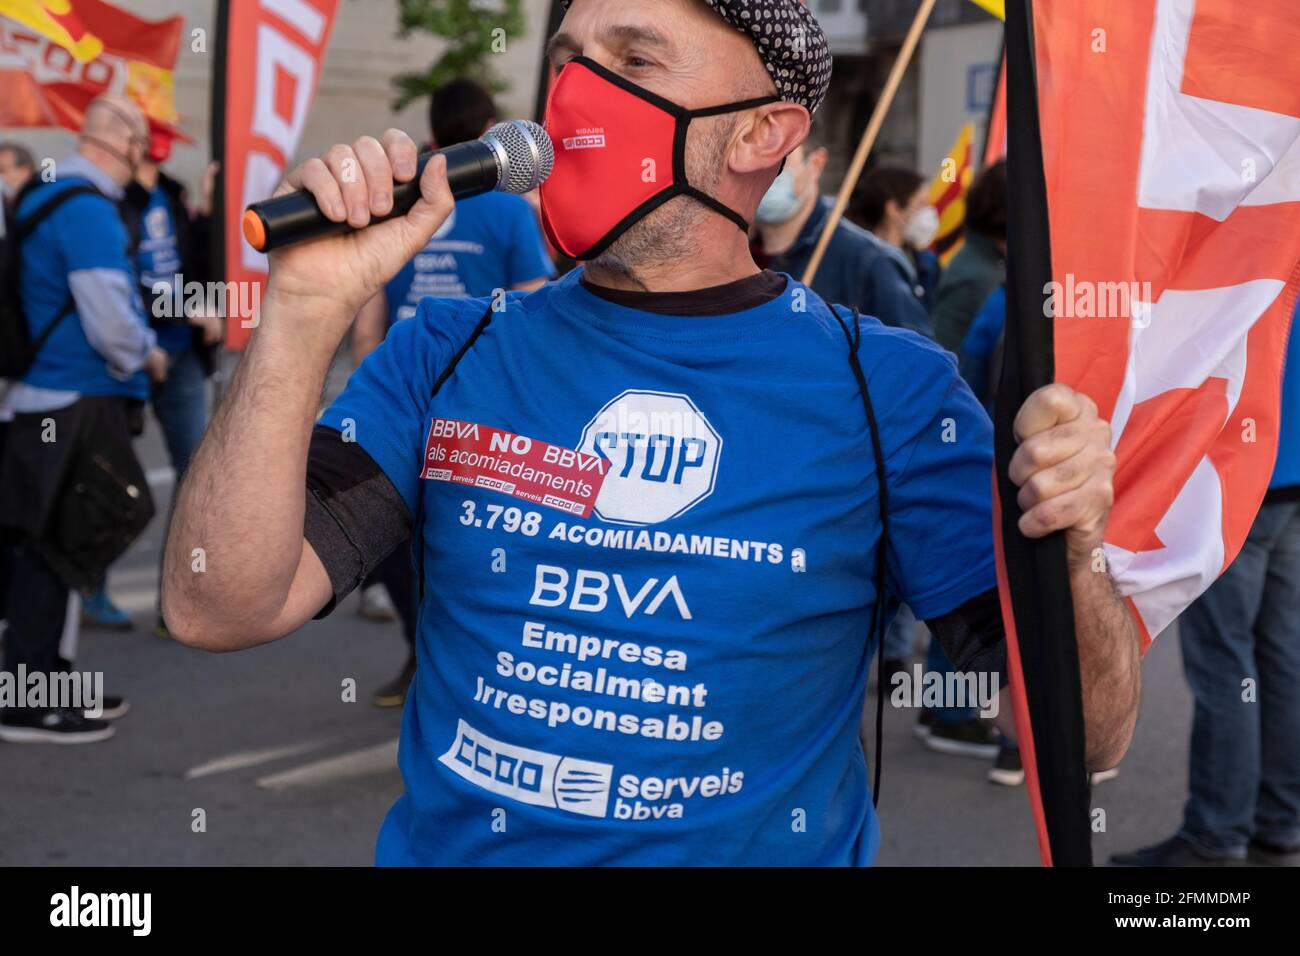 Barcelona, Spain. 10th May, 2021. A protester wearing a blue shirt labeled against the 3,798 layoffs speaks on a microphone during a protest.Summoned by the banking unions, hundreds of Banco Bilbao Vizcaya Argentaria (BBVA) bank workers have gathered in front of the headquarters in Vía Laietana to protest the Employment Regulation File (ERE) that the entity wants to apply with the dismissal of more than 3,000 workers. (Photo by Paco Freire/SOPA Images/Sipa USA) Credit: Sipa USA/Alamy Live News Stock Photo